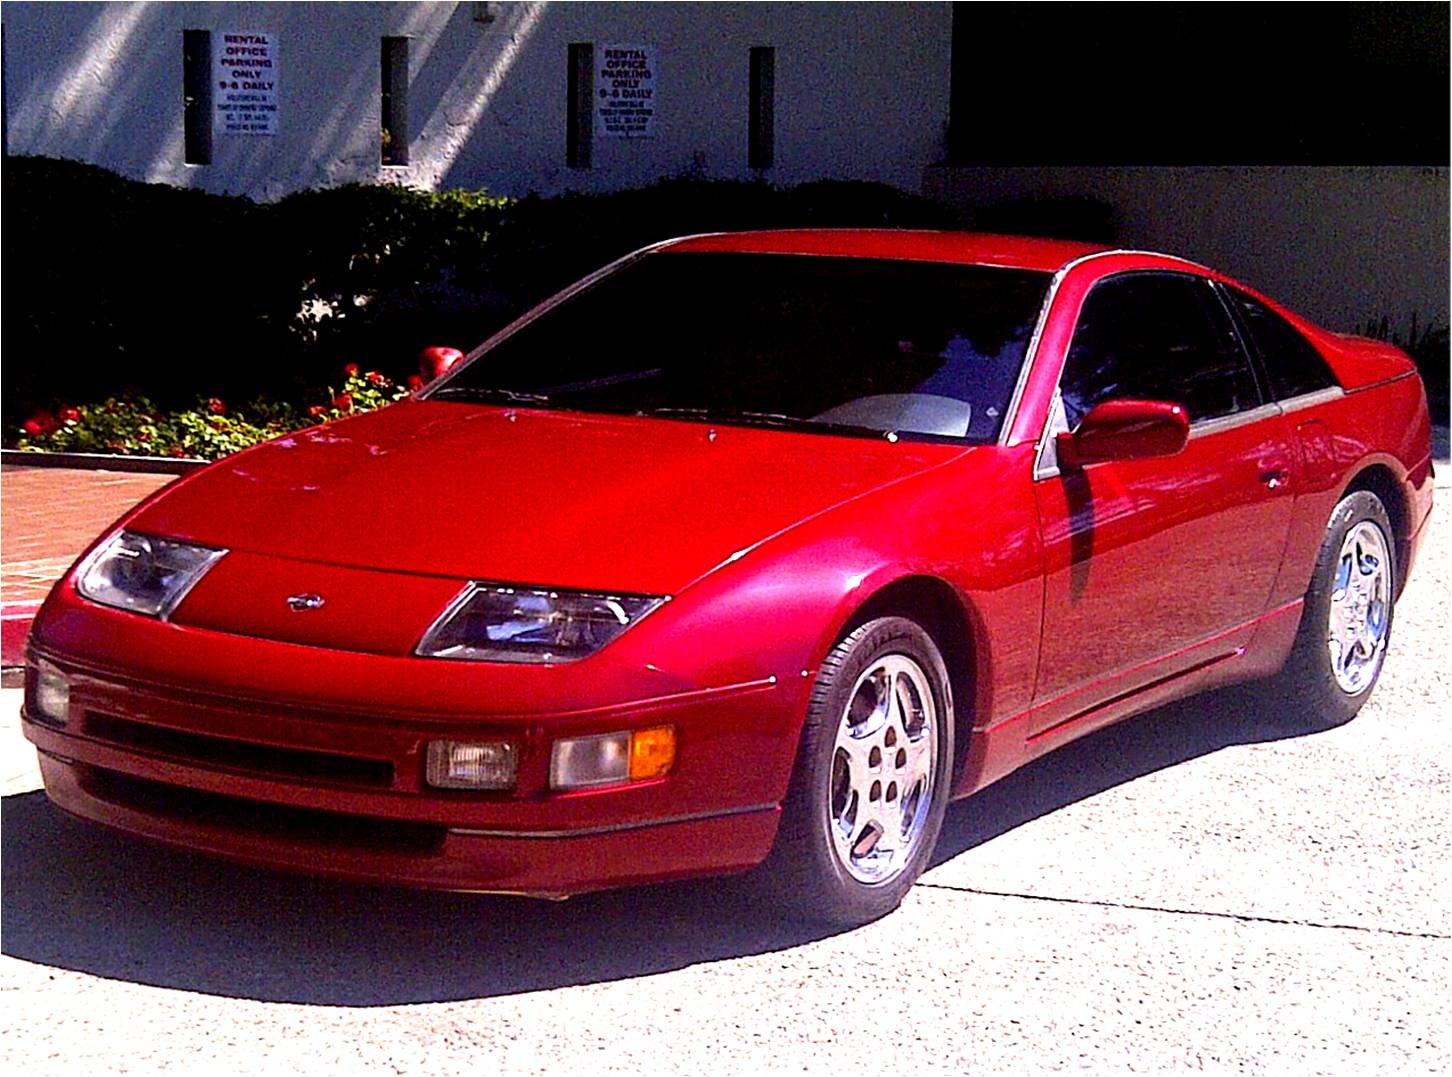 How much is car insurance for a 1992 nissan 300zx #7